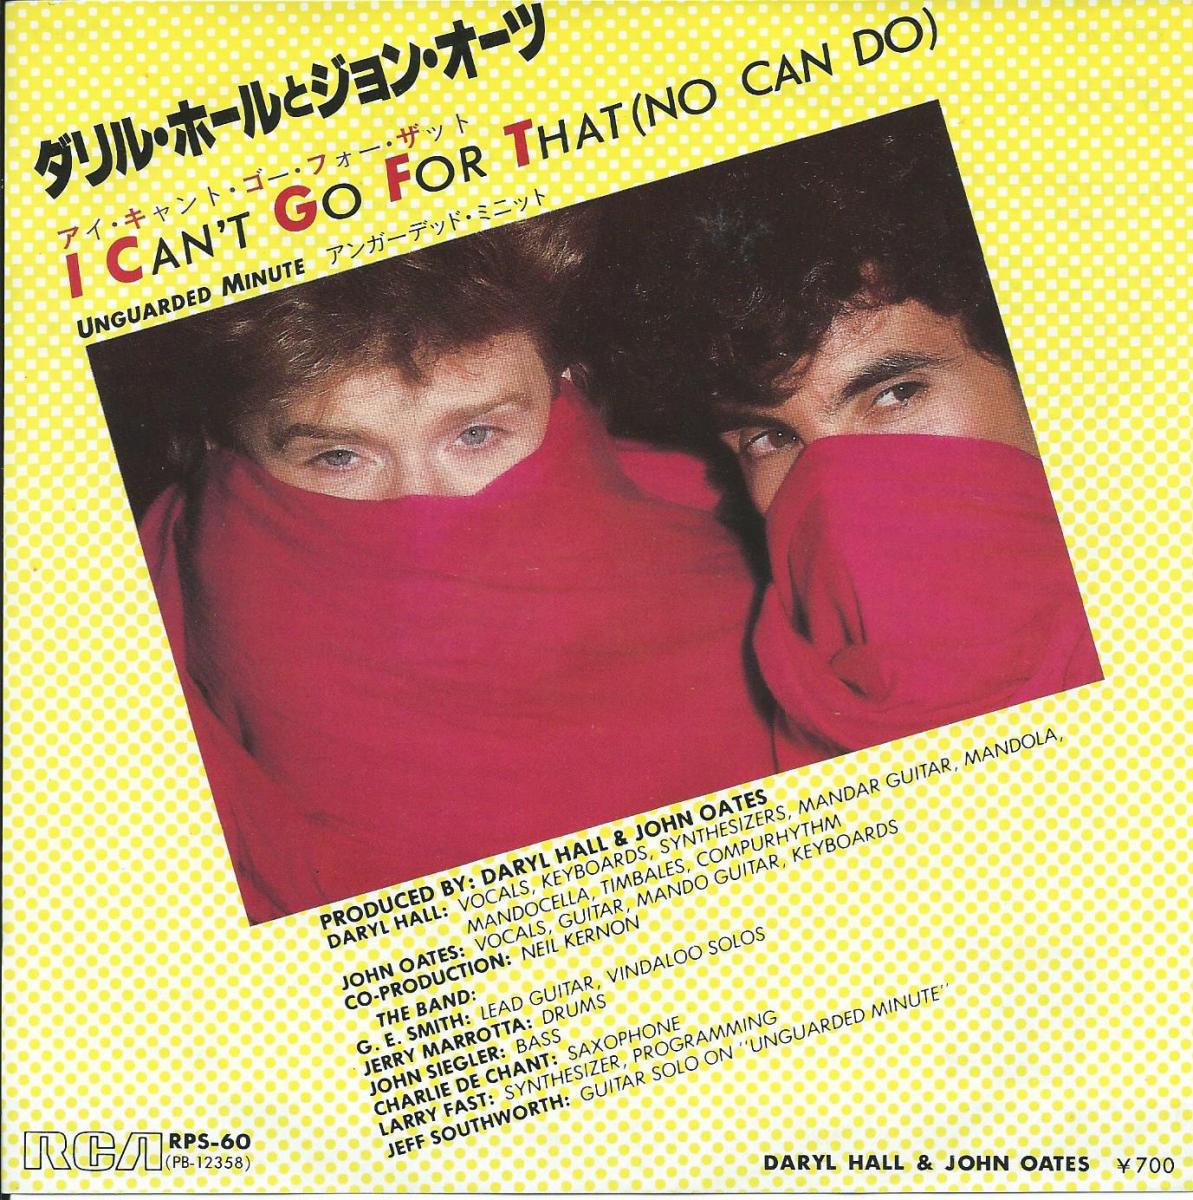 DARYL HALL & JOHN OATES 롦ۡȥ󡦥 / I CAN'T GO FOR THAT ( NO CAN DO)  (7